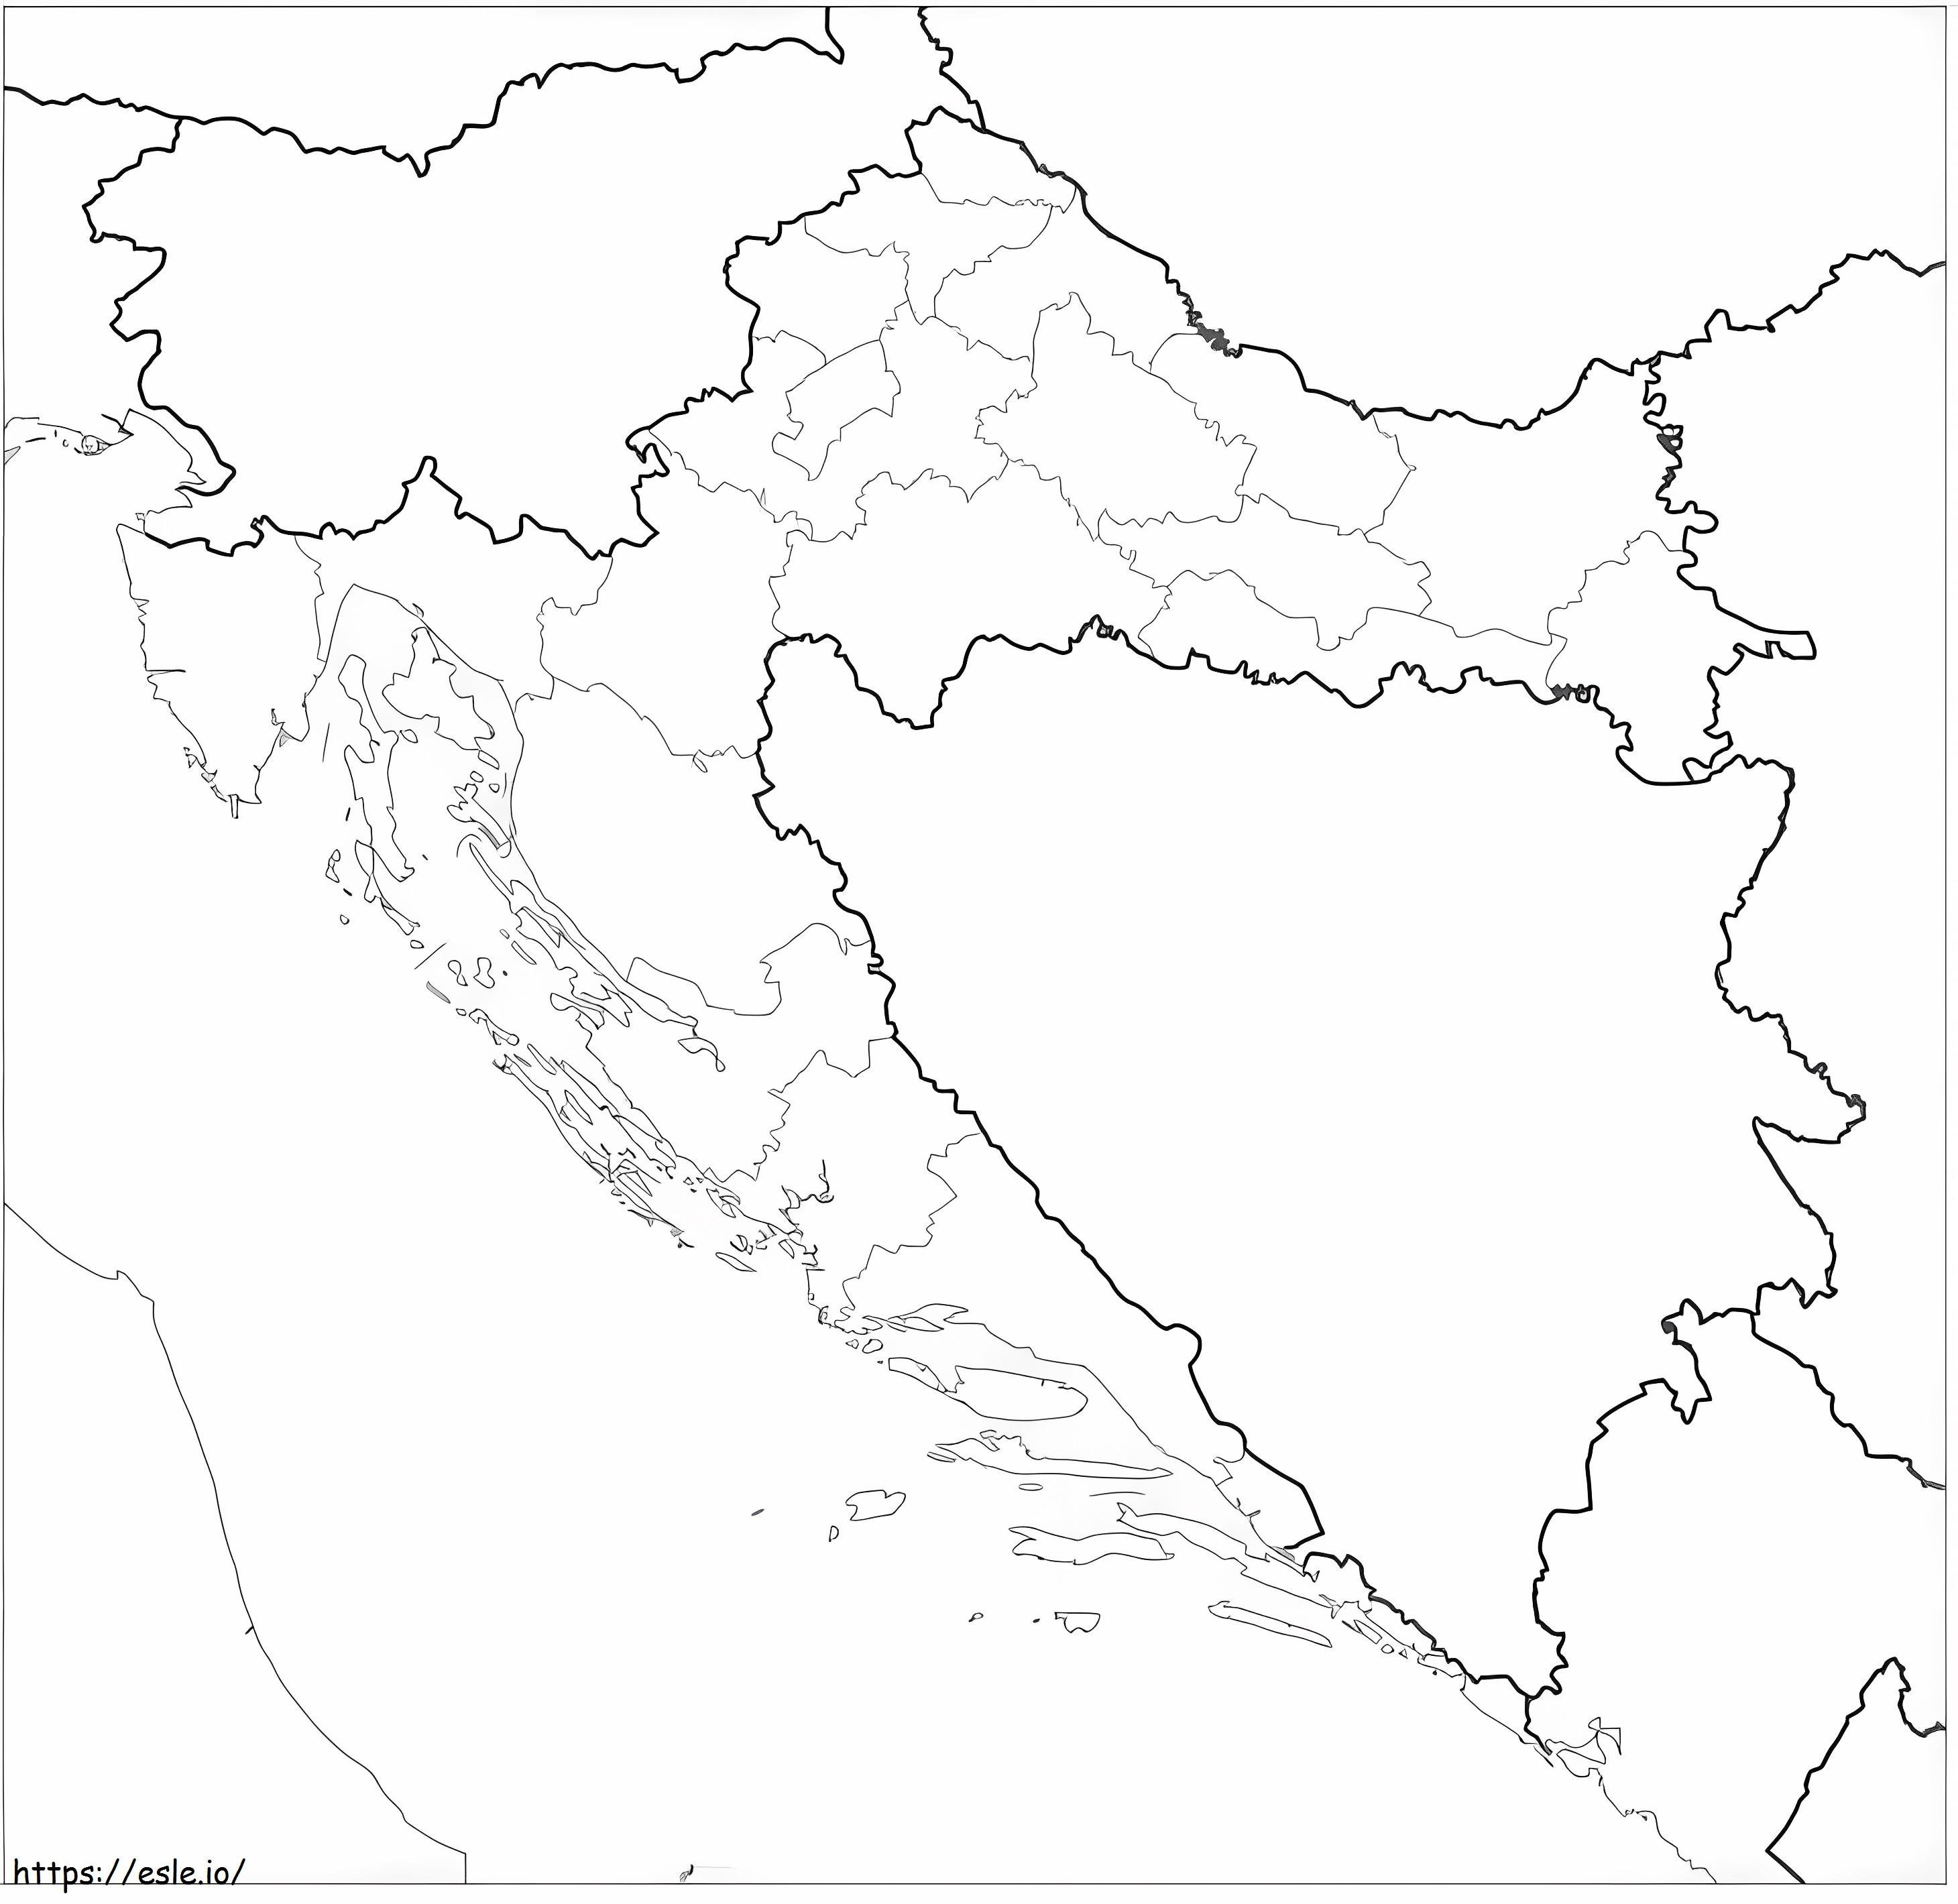 Croatia Map coloring page